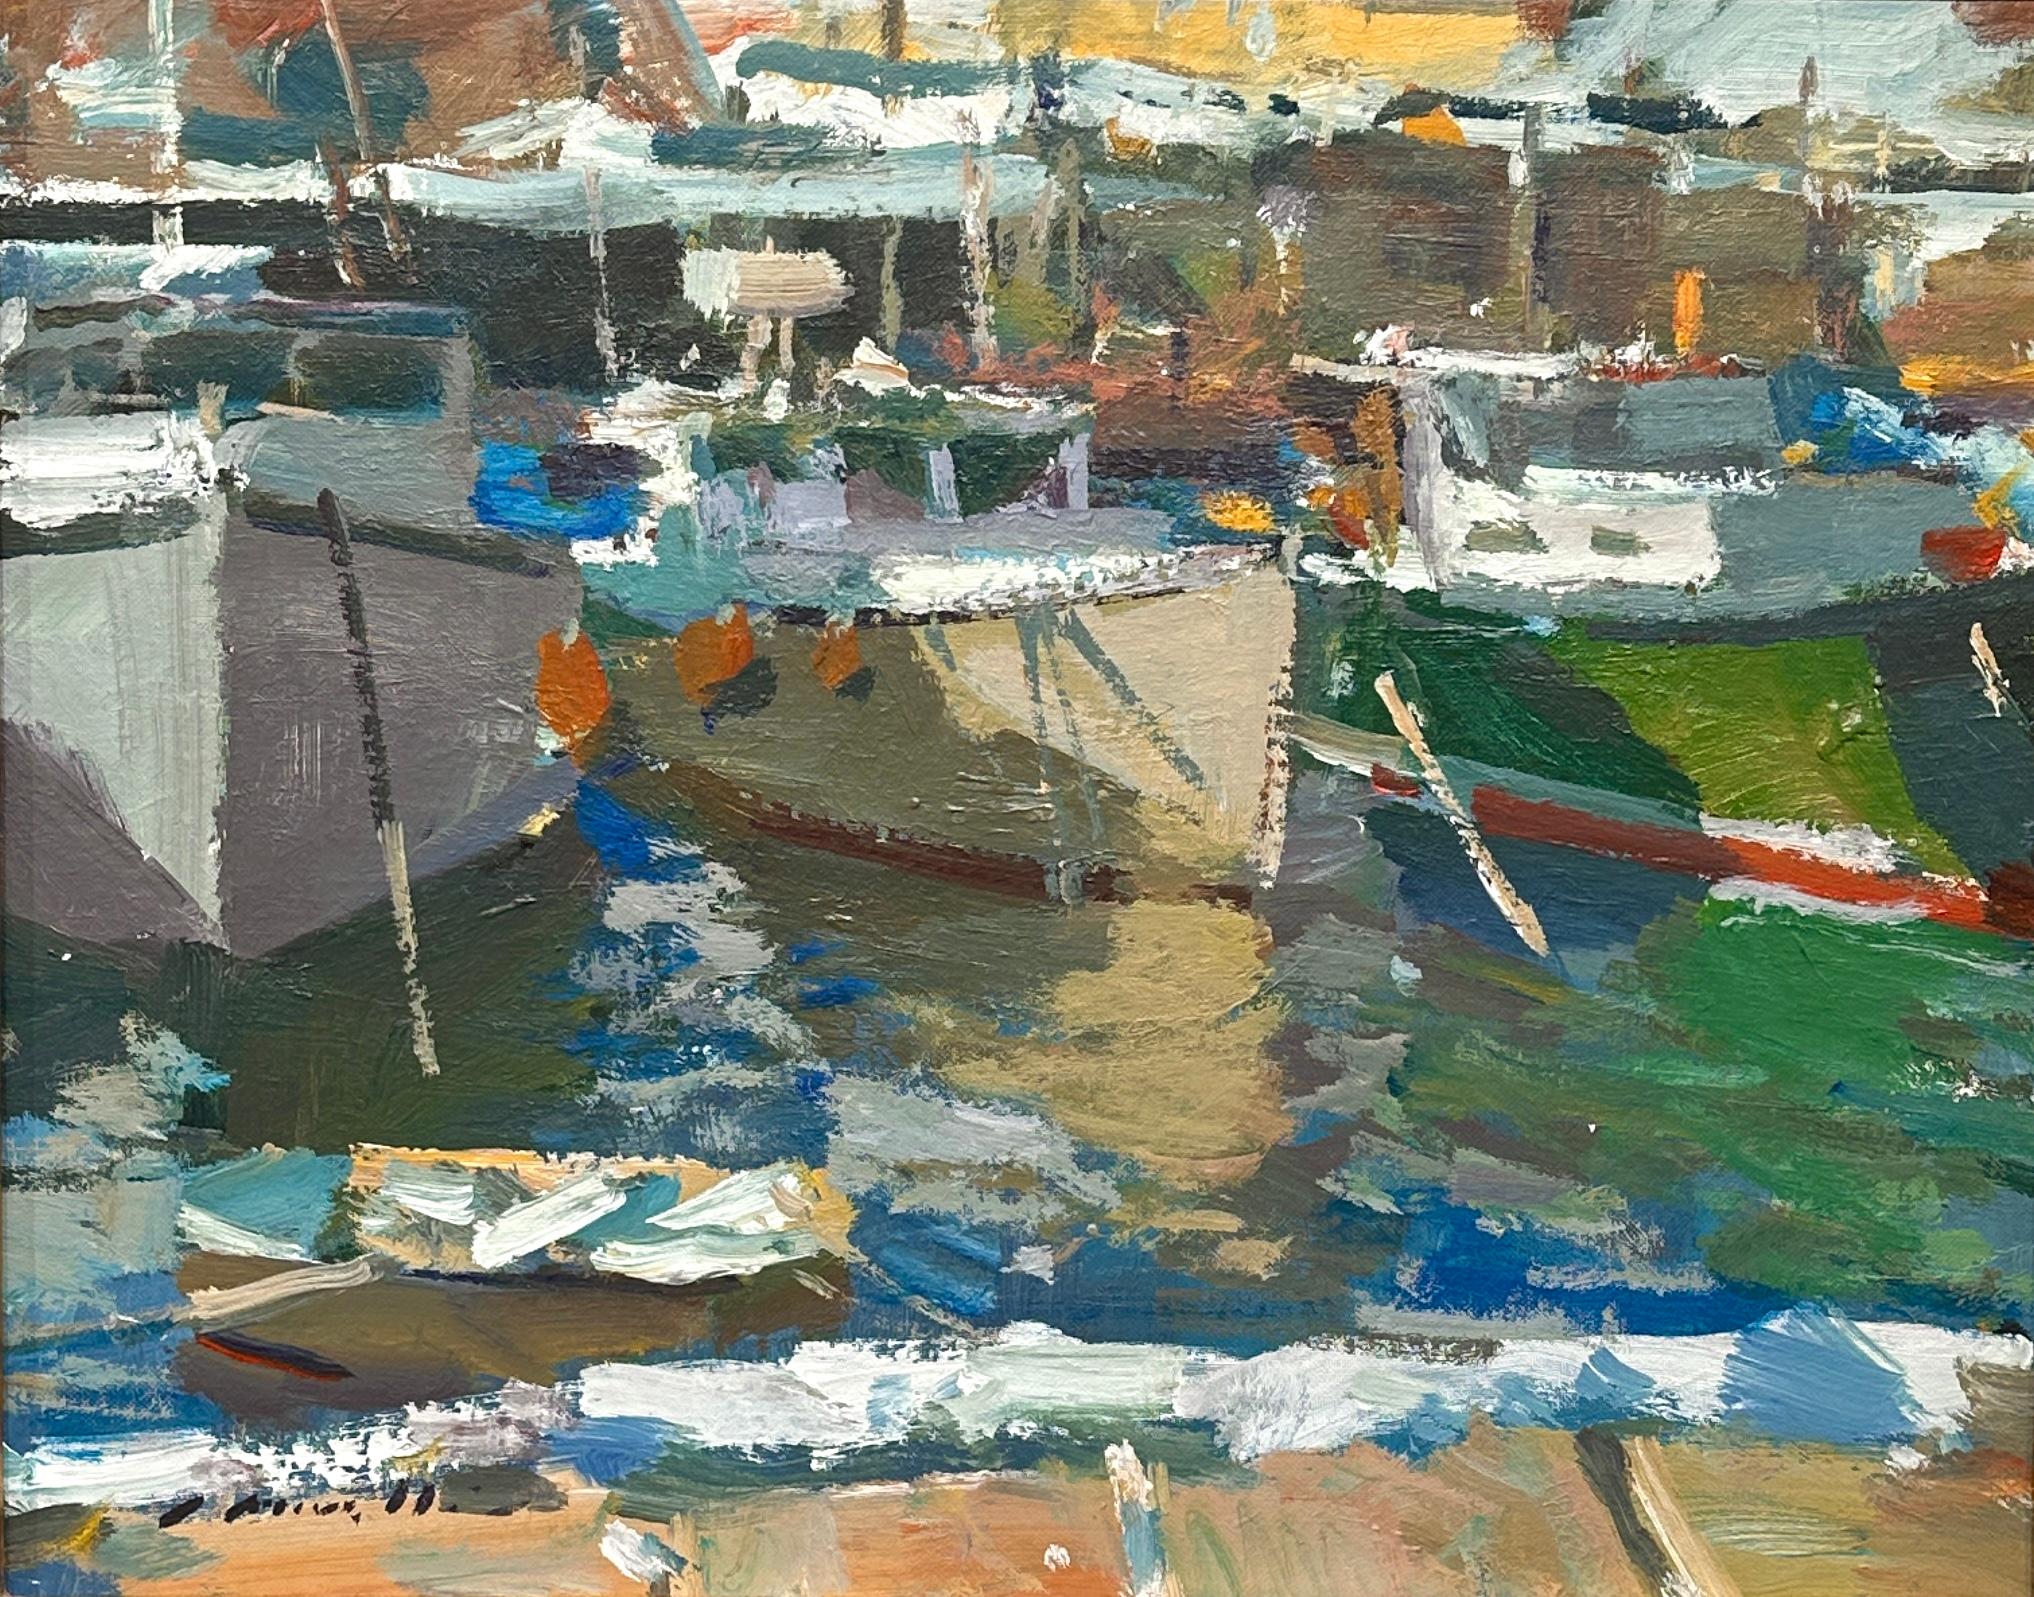 Charles Movalli Landscape Painting - "Three Hulls" - Colorful Boats, Impressionistic, Seascape